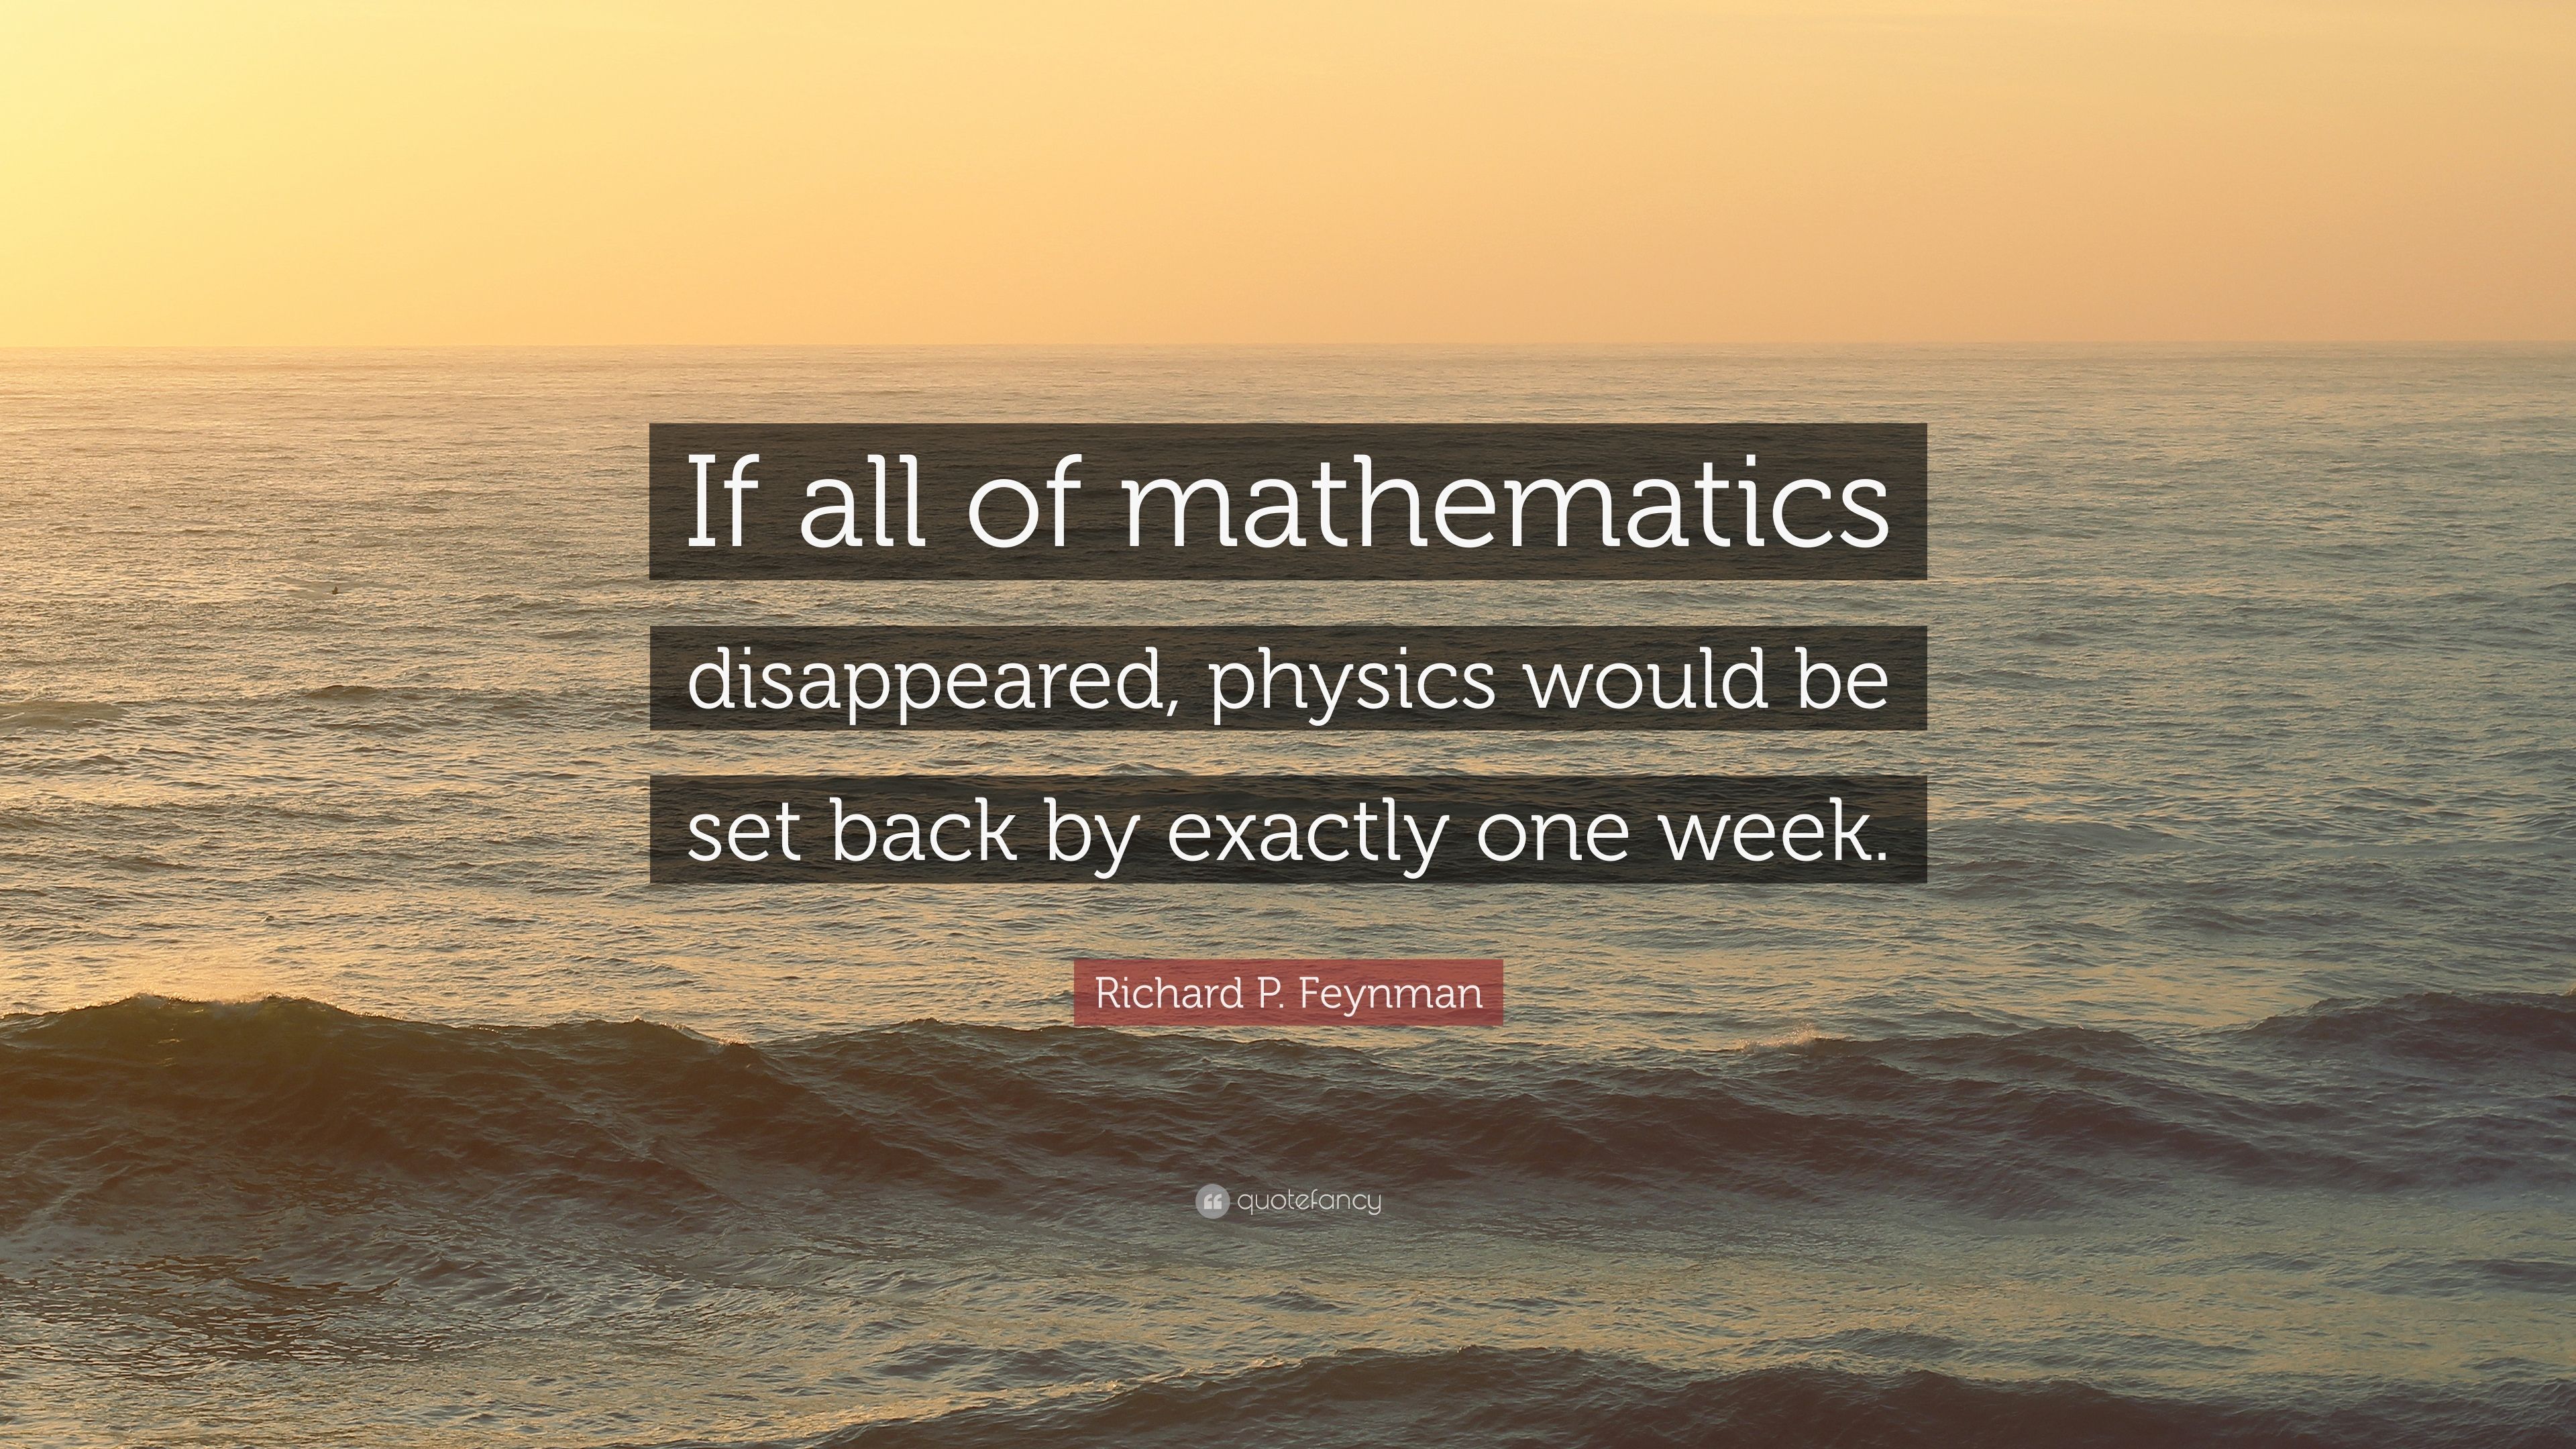 Richard P. Feynman Quote: “If all of mathematics disappeared